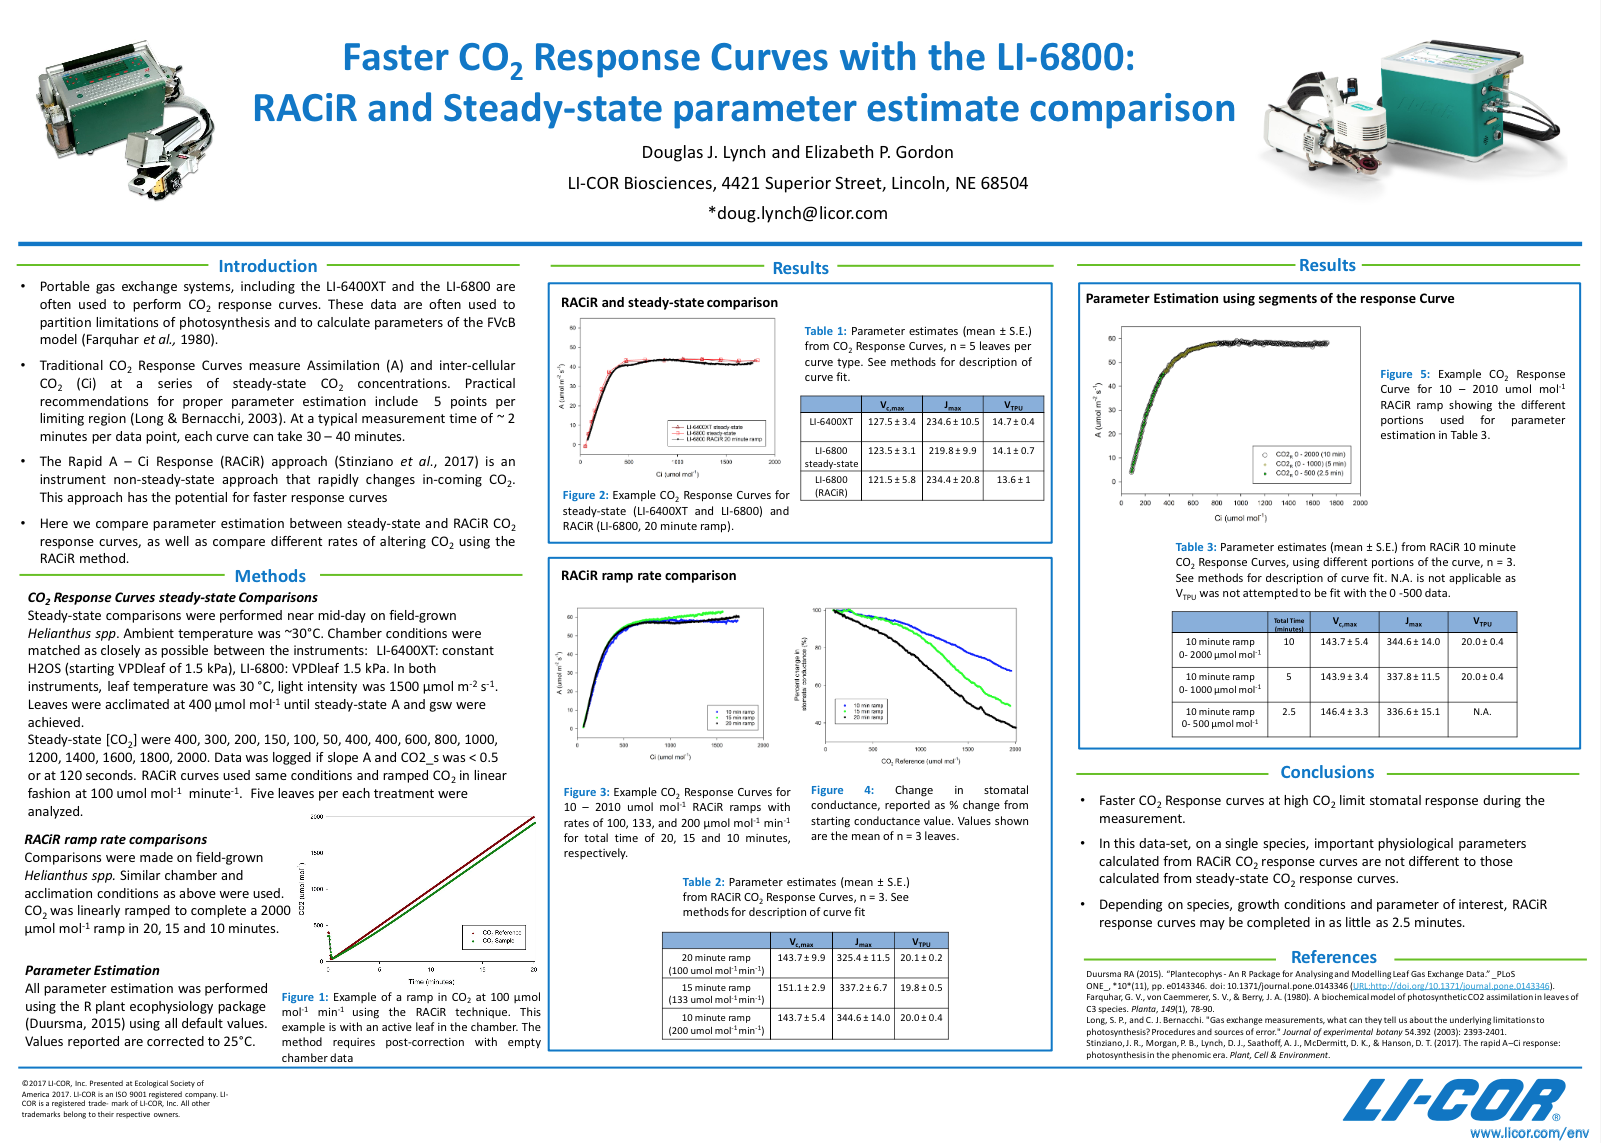 Faster CO2 Response Curves with the LI-6800: RACiR and Steady-state parameter estimate comparison